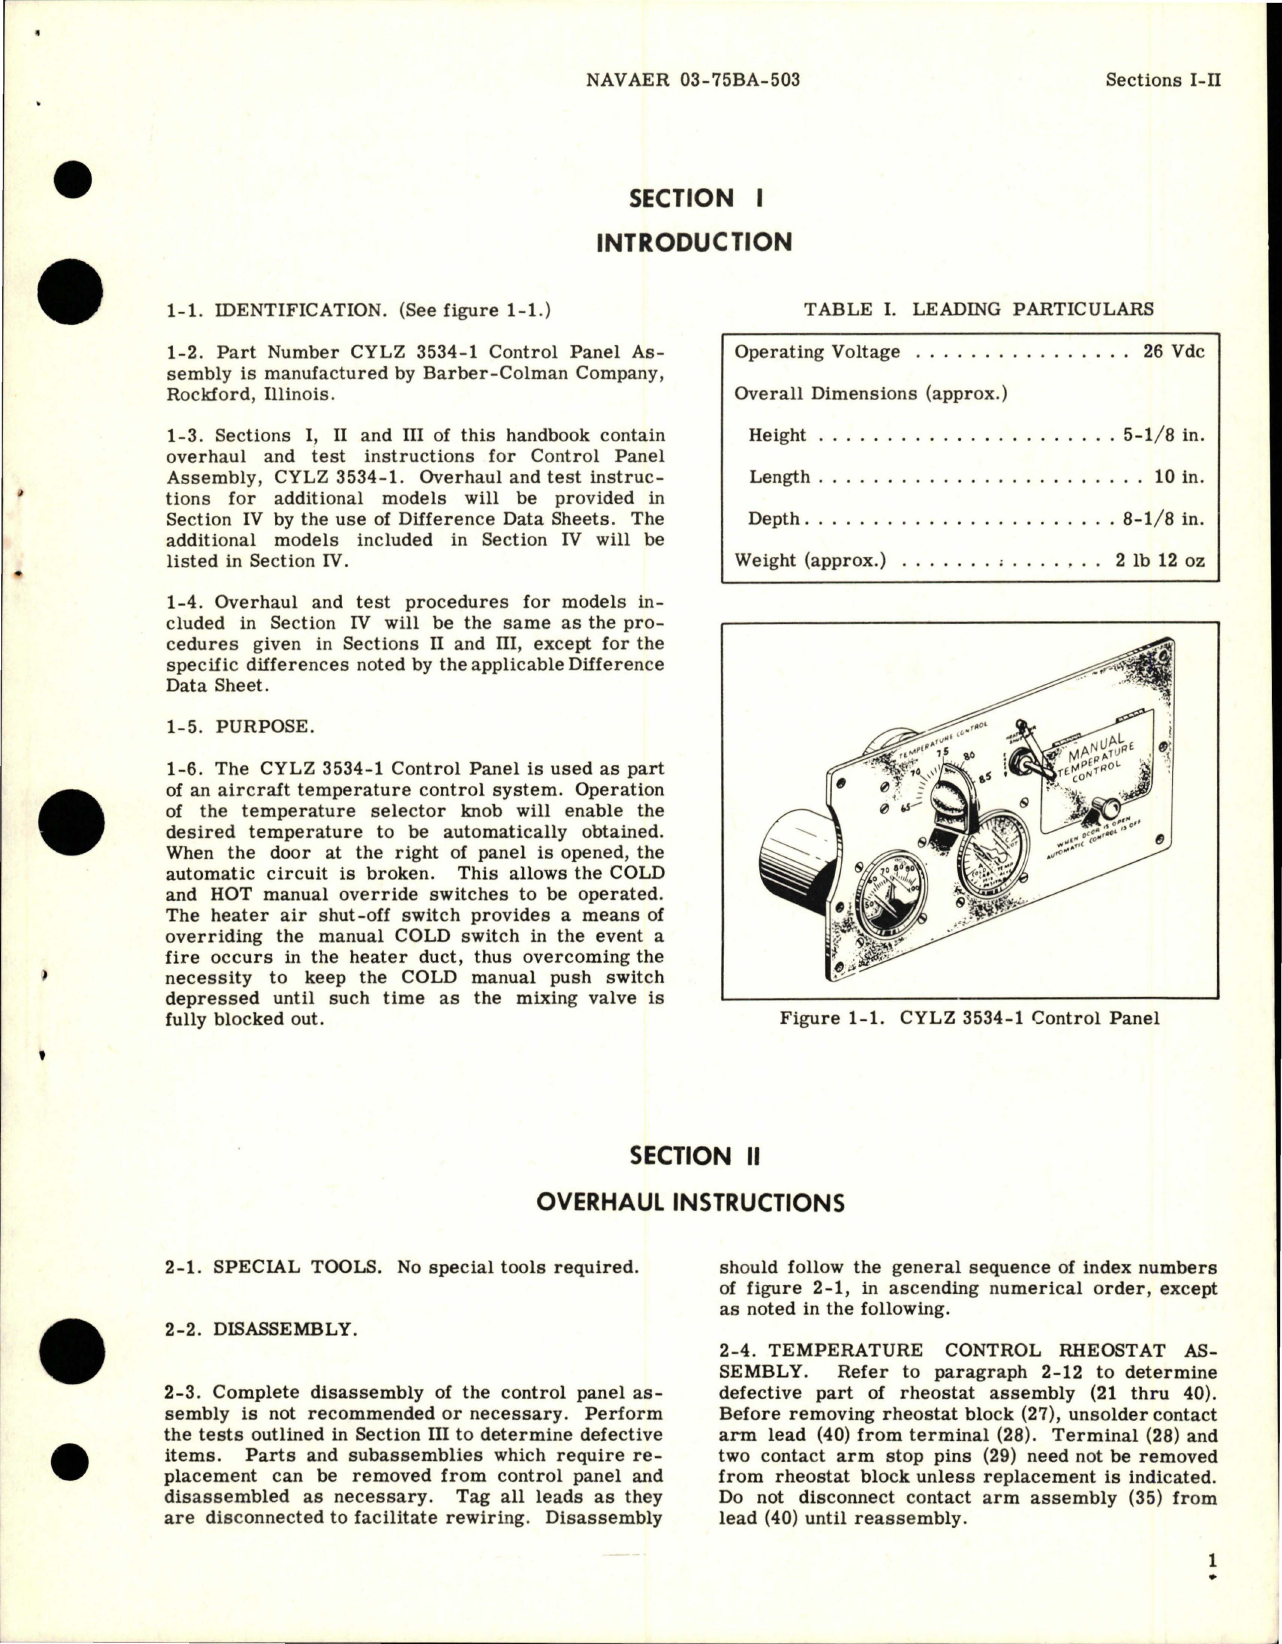 Sample page 5 from AirCorps Library document: Overhaul Instructions for Aircraft Temperature Control System Control Panel - Part CYLZ 3534-1